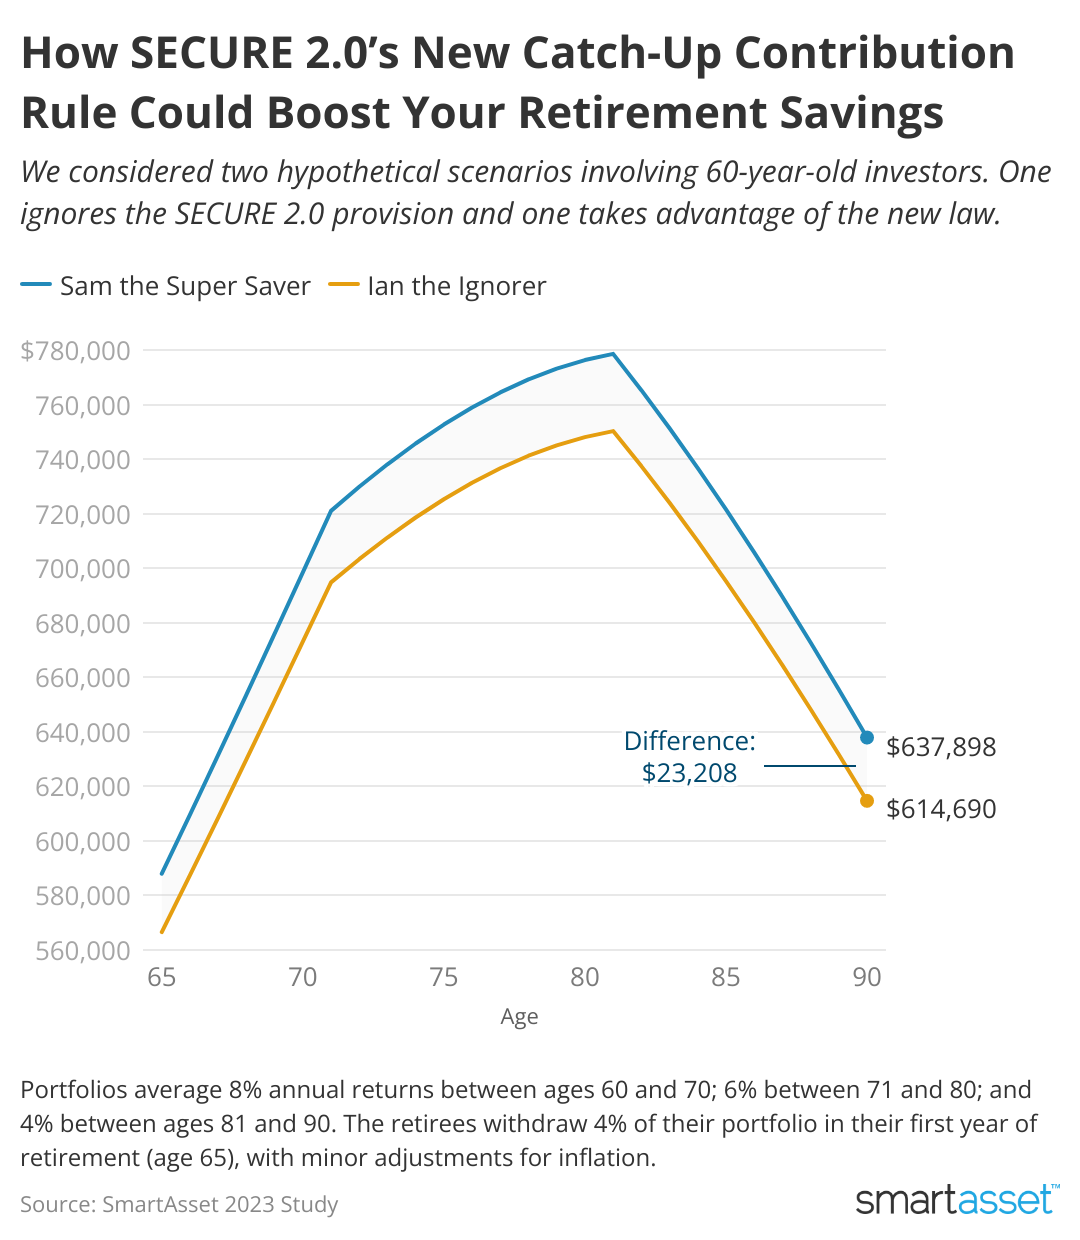 A line chart showing estimated account balances over time based on two different models of retirement savings.